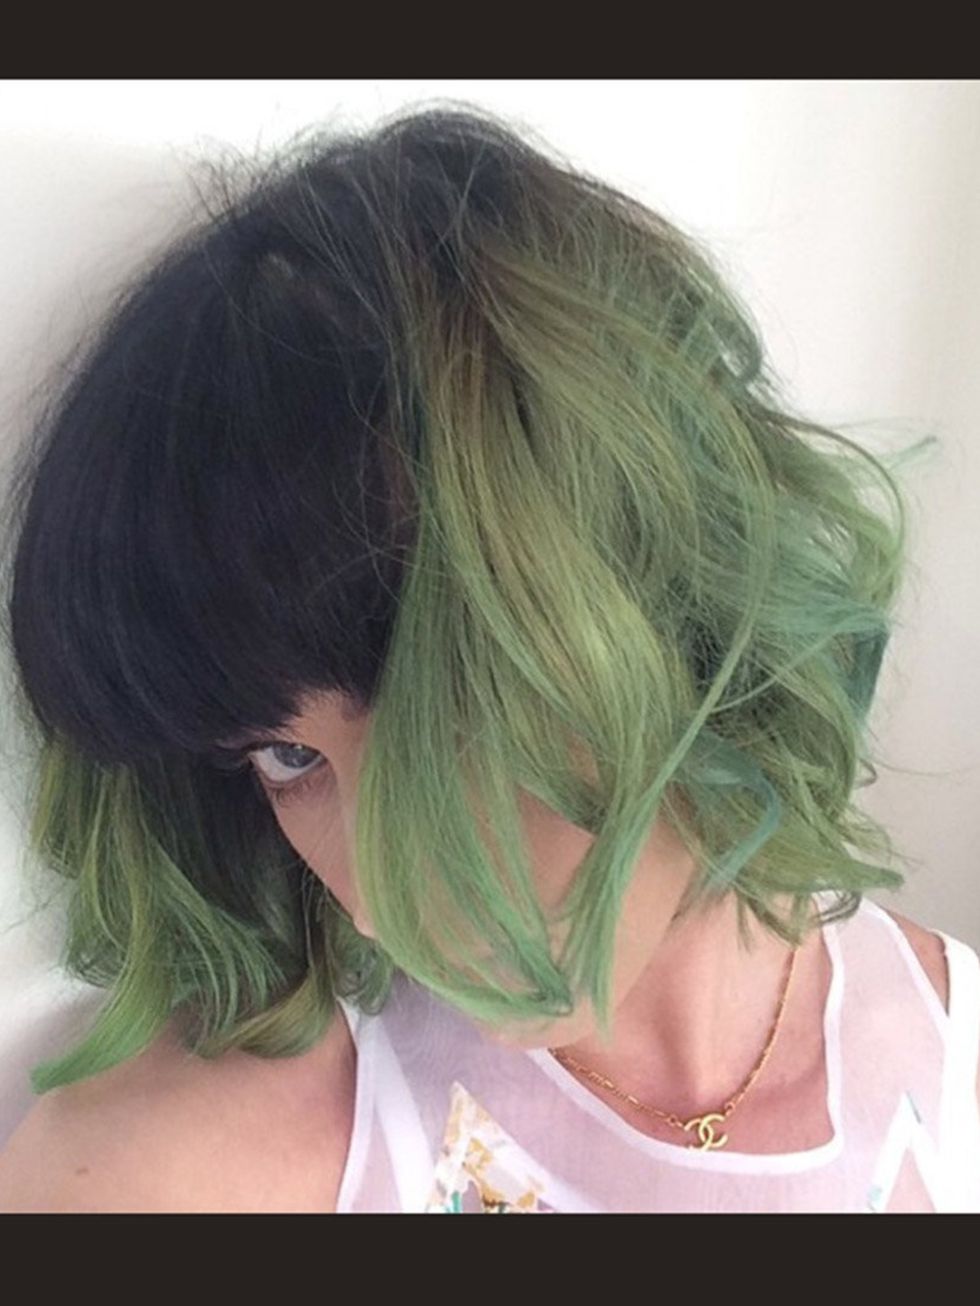 <p>Katy Perry dyes her hair and instagrams - 'slime green for spring', April 2014.</p>